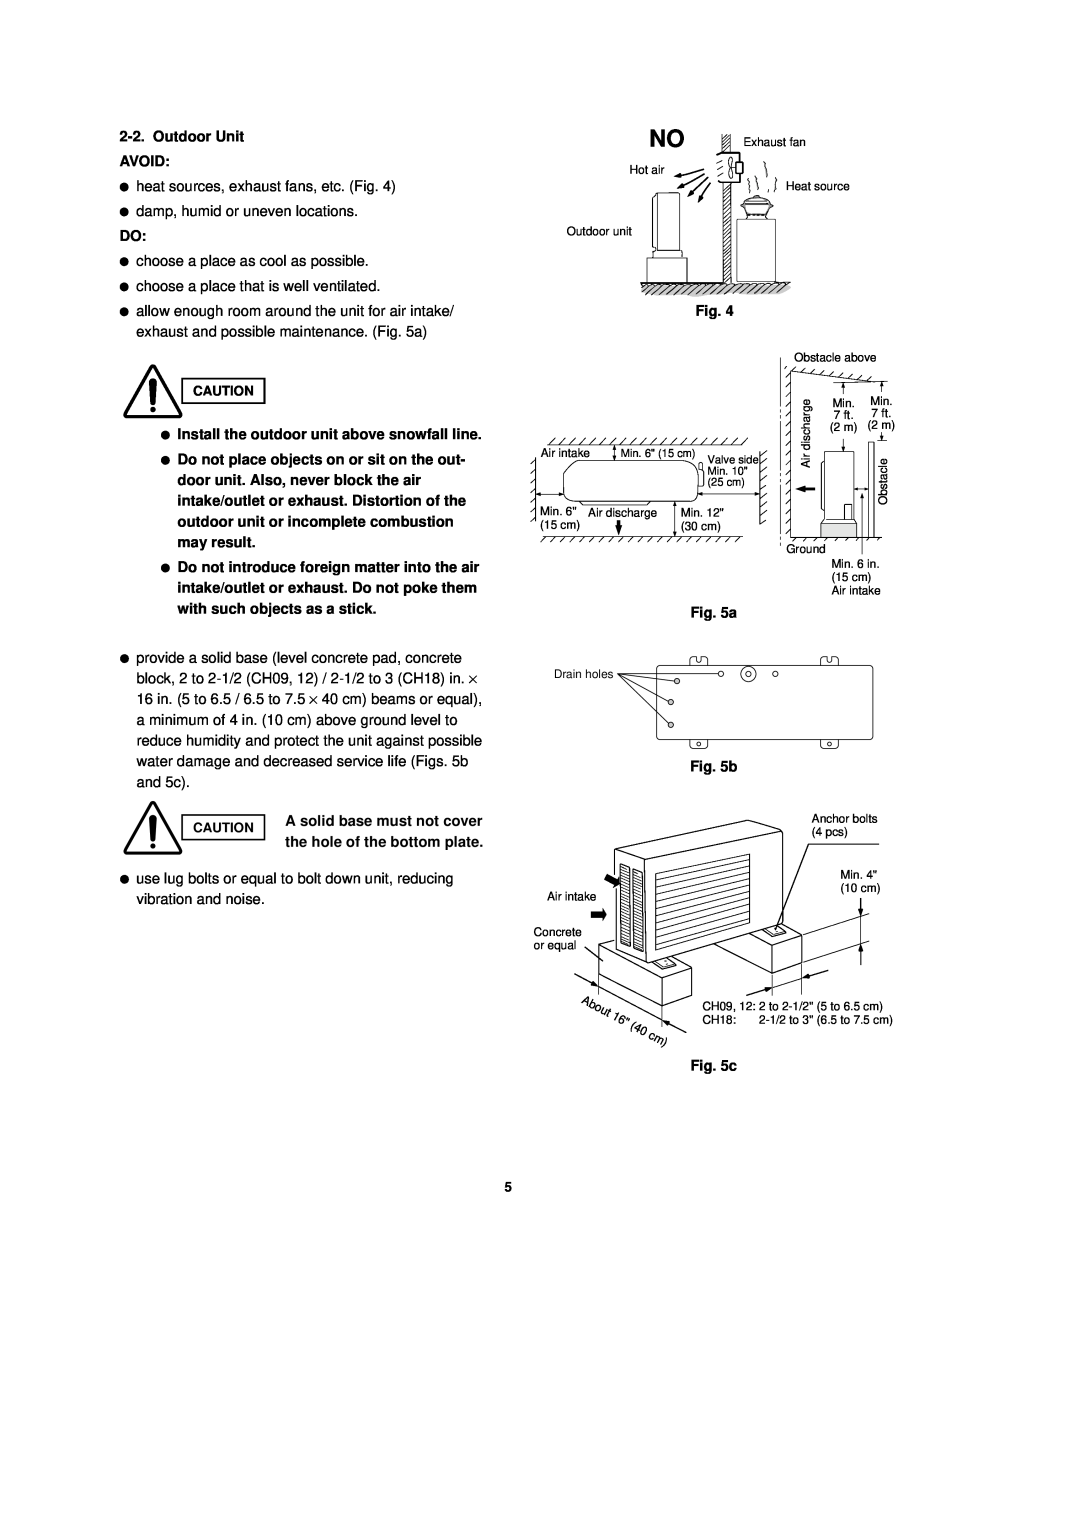 Sanyo CH0951, CH1251 Outdoor Unit AVOID, Install the outdoor unit above snowfall line, A solid base must not cover 